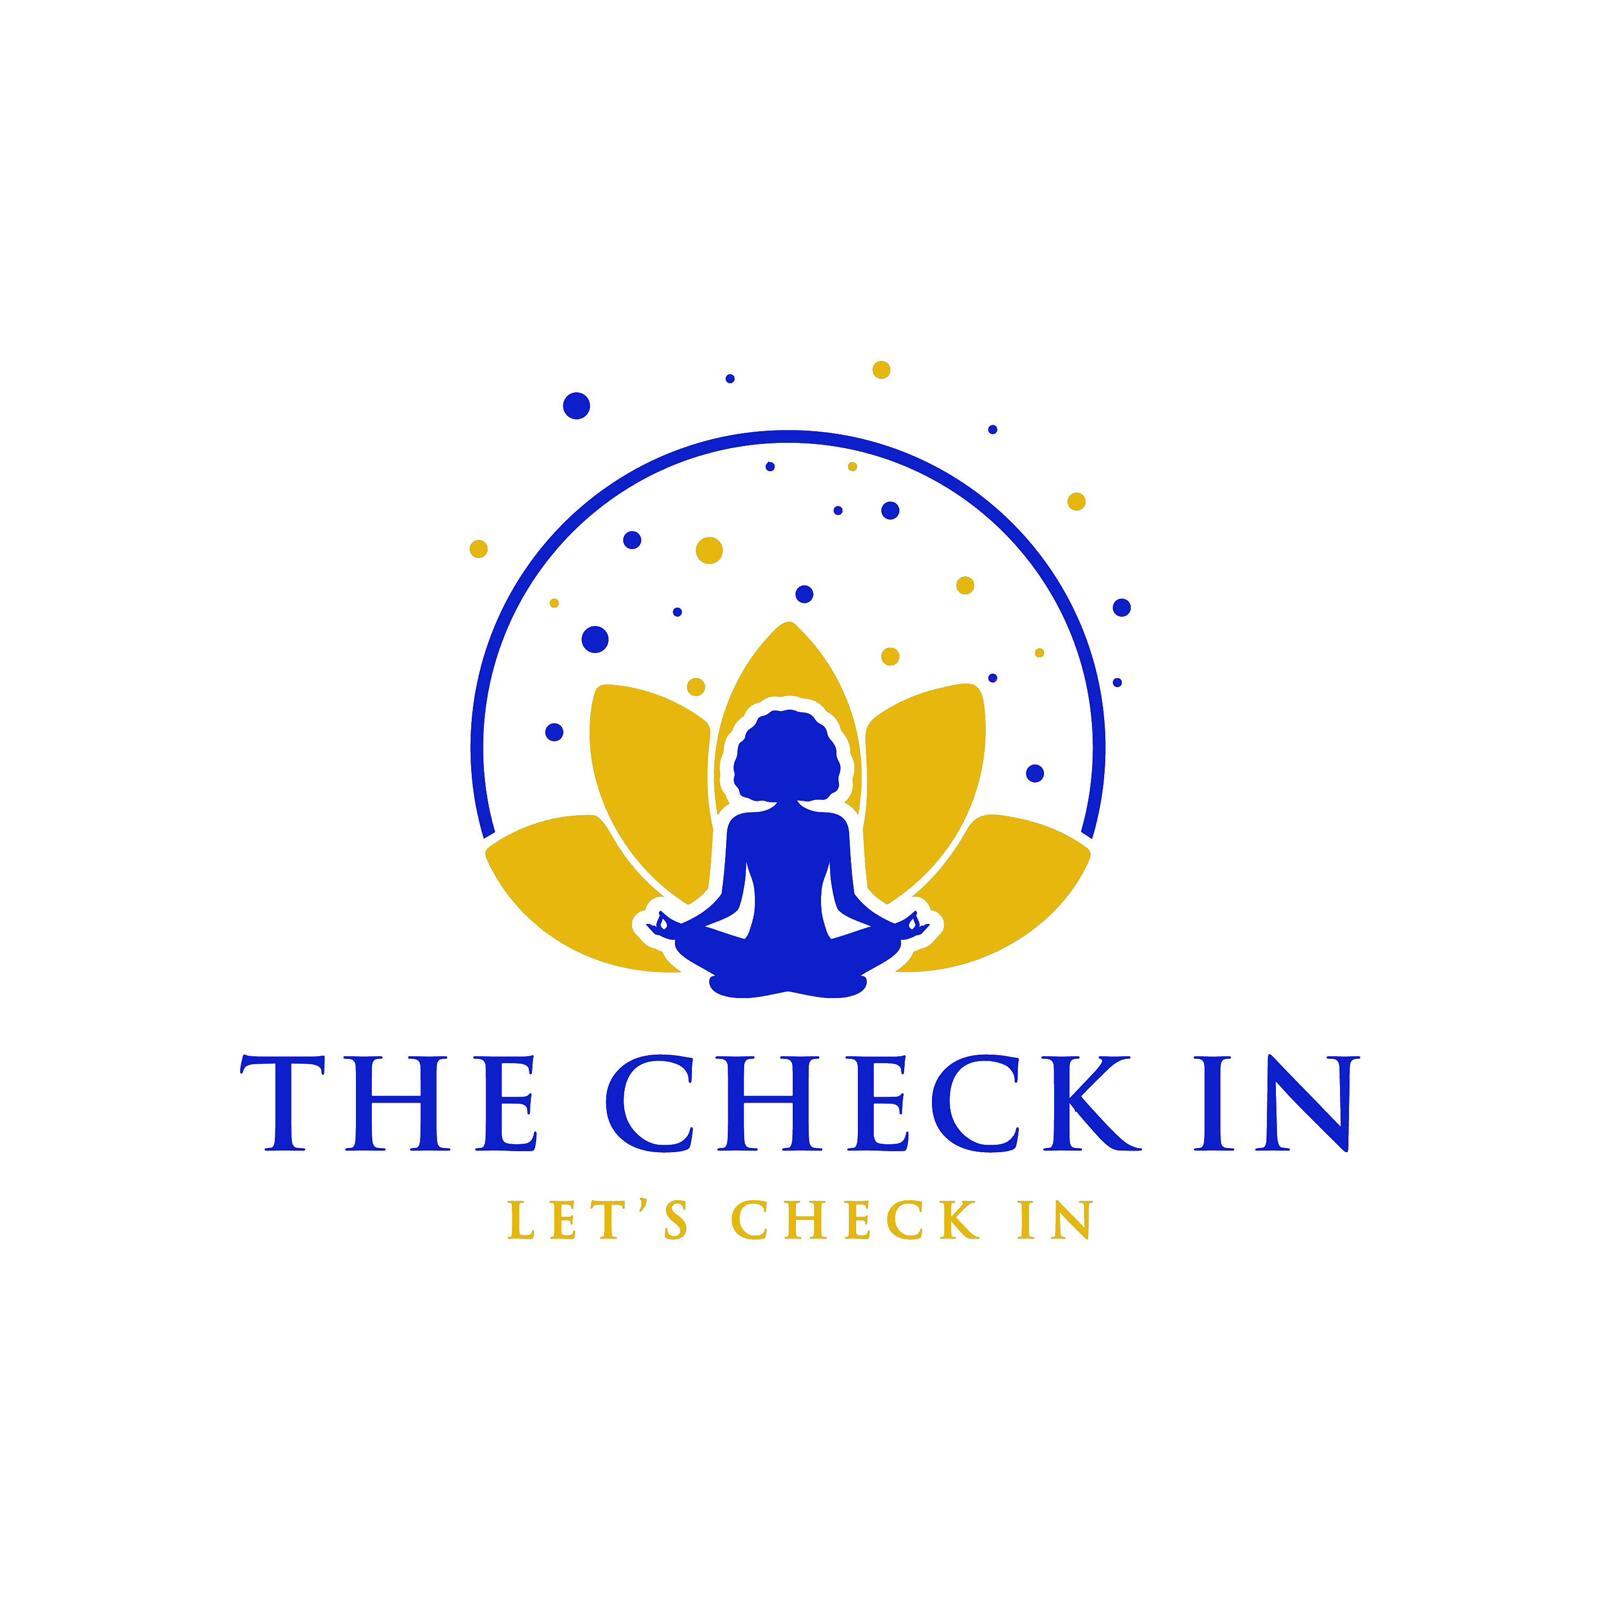 LOGO The Check-In Well-Being Initiative Ltd London 020 8050 0994